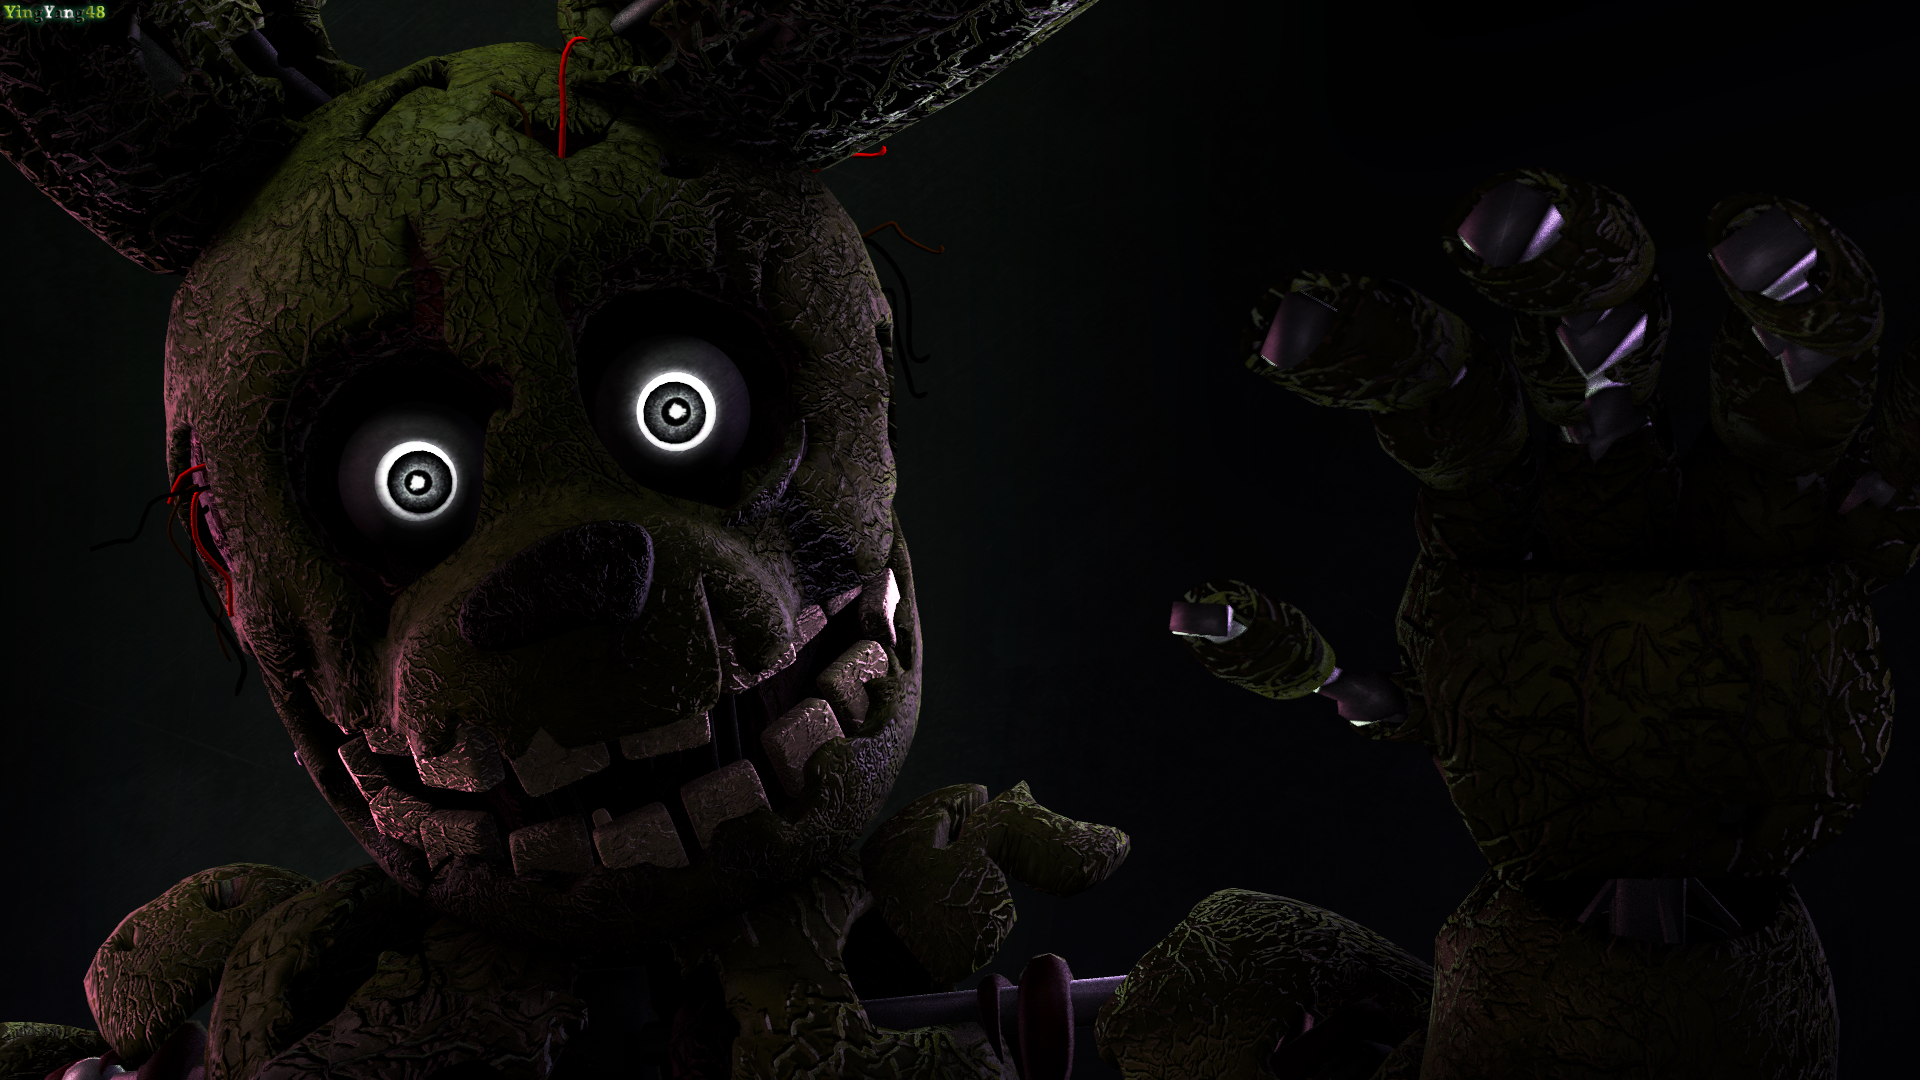 Five Nights At Freddy's 3 Wallpapers on